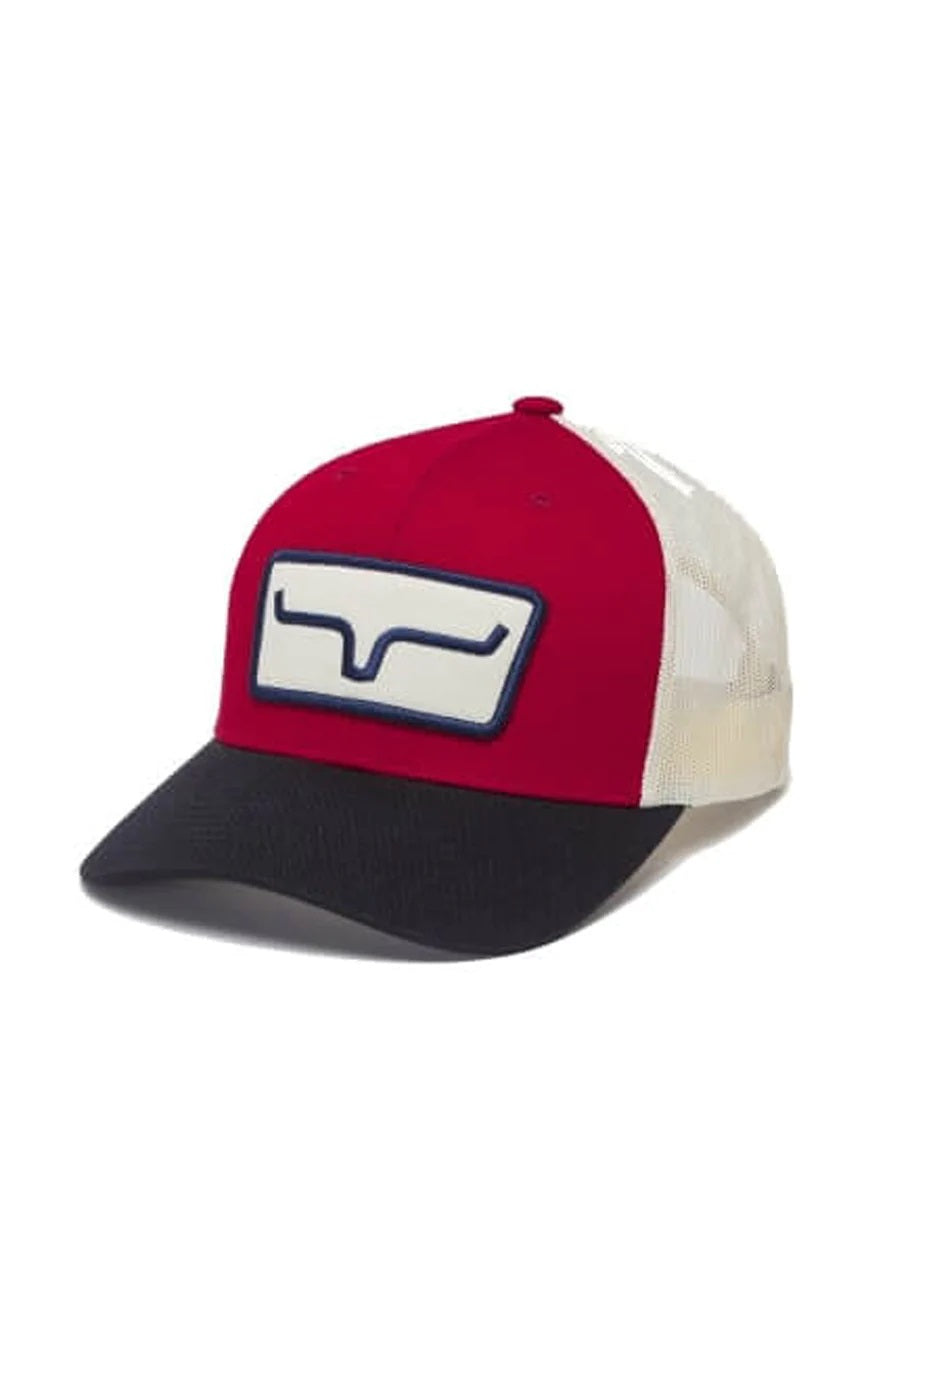 'Kimes Ranch' Men's The Cutter Cap - Red